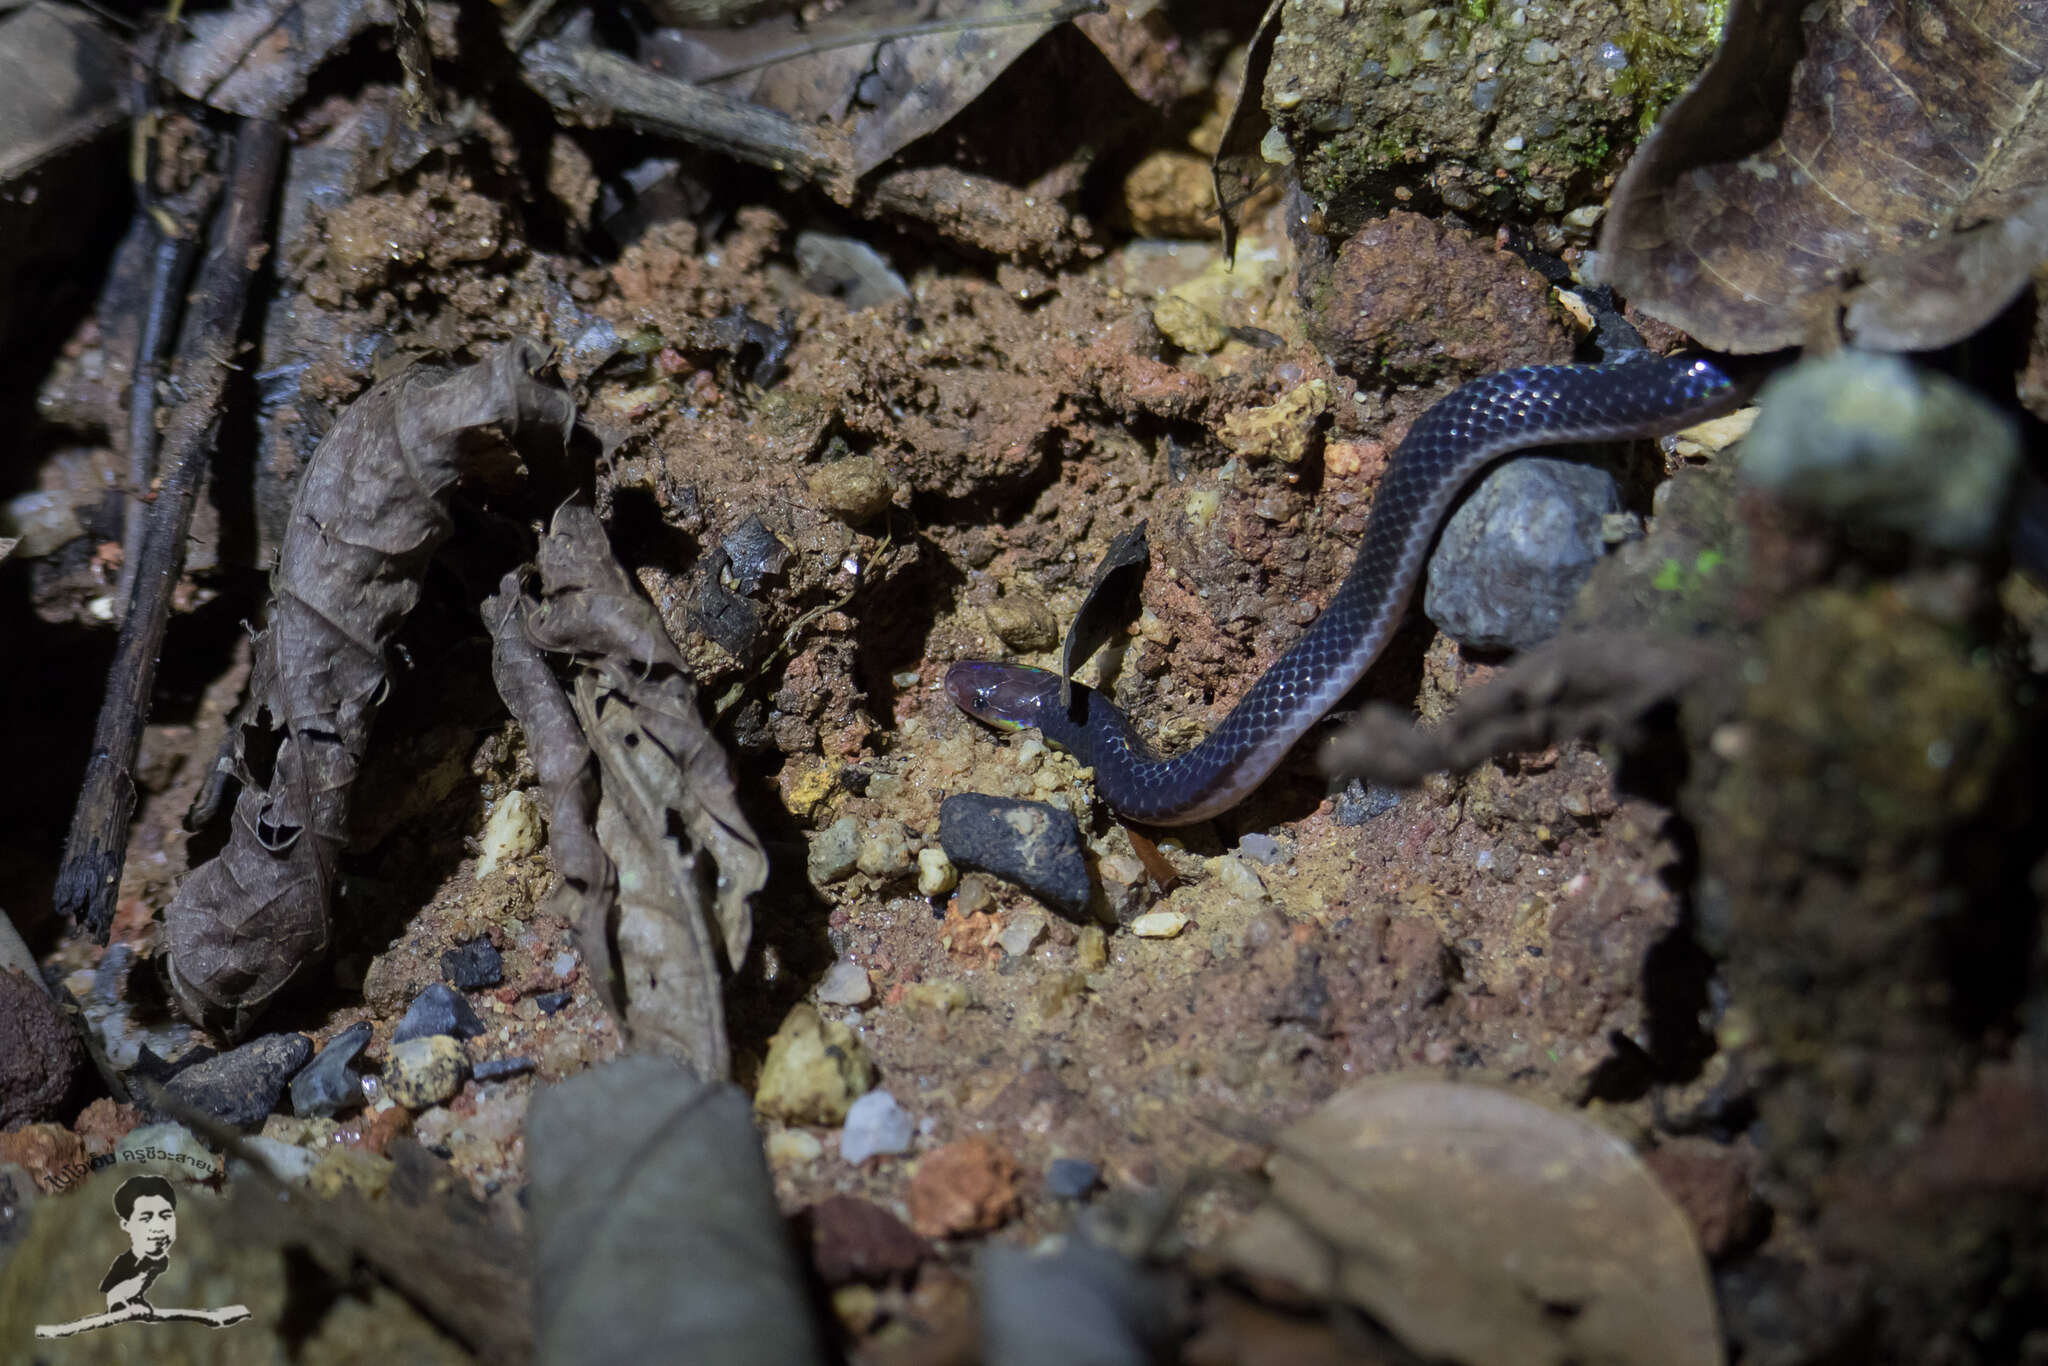 Image of Red-headed Reed Snake